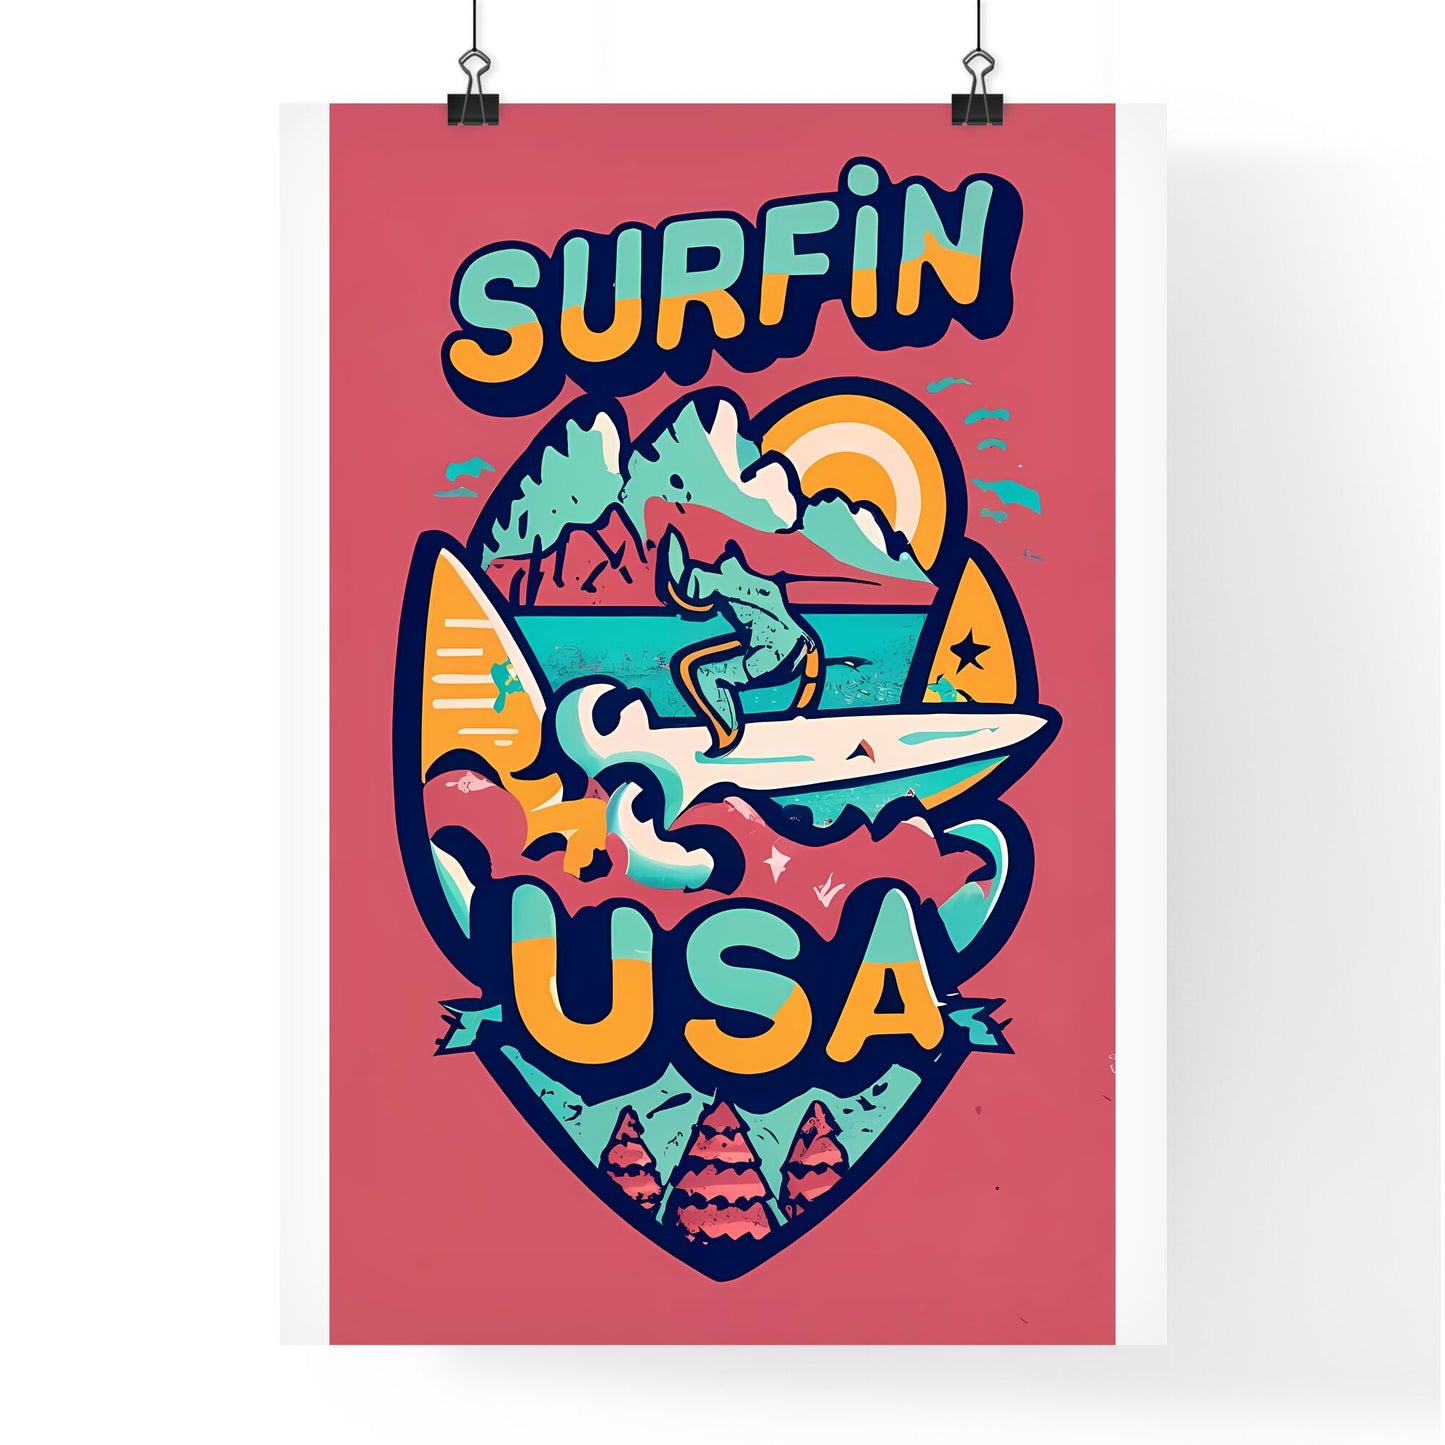 Surfin Usa - A Colorful Logo With A Man On A Surfboard Art Print Default Title